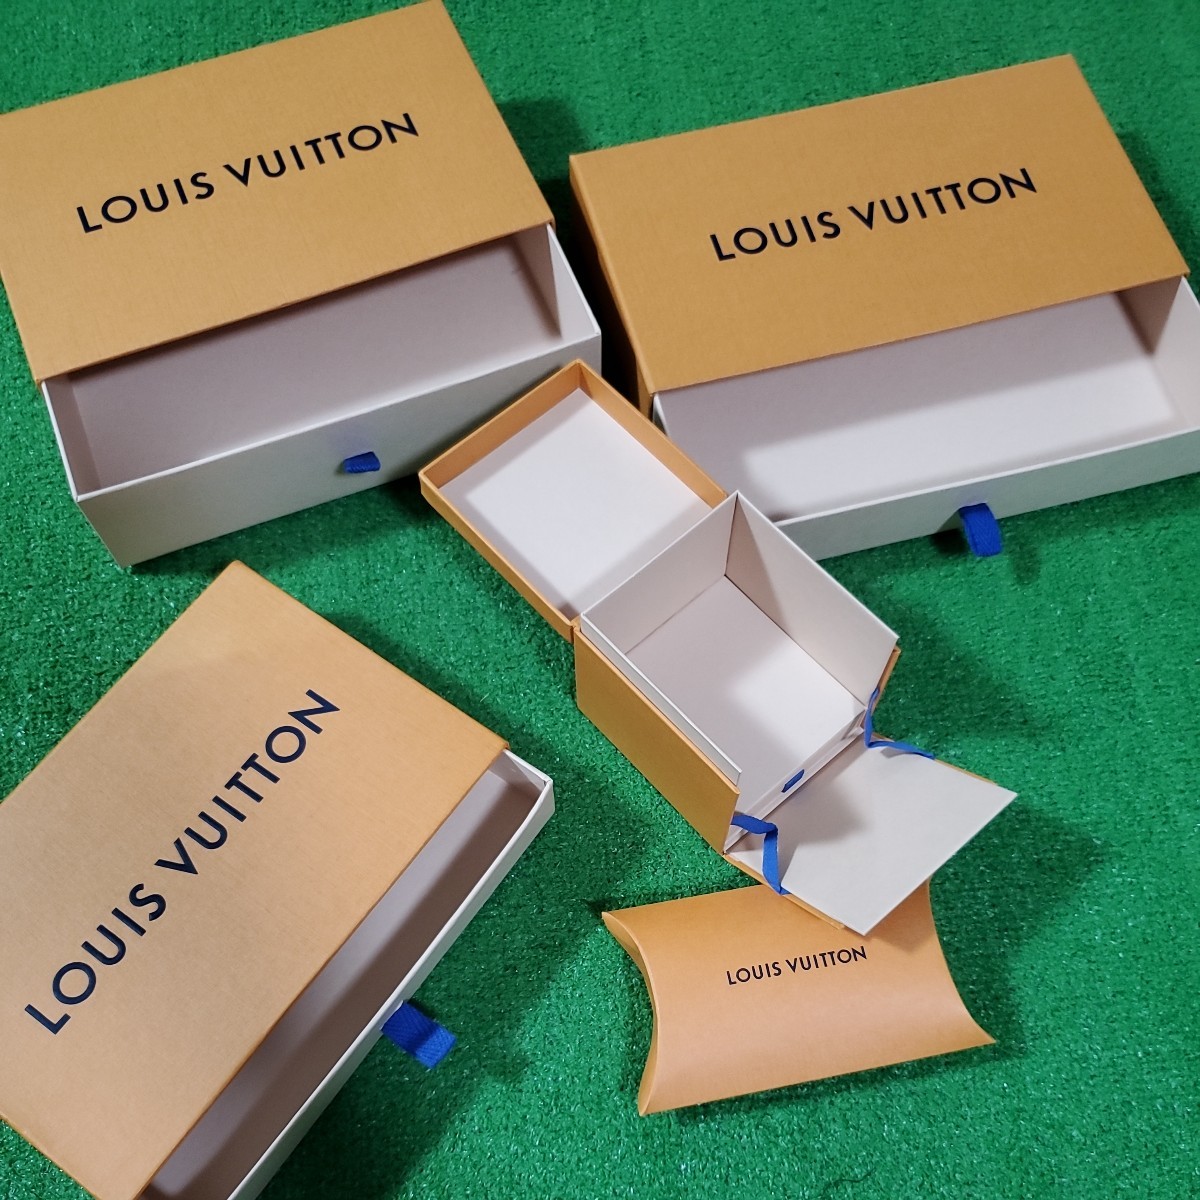 LOUIS VUITTON 空き箱 空箱 まとめ売り